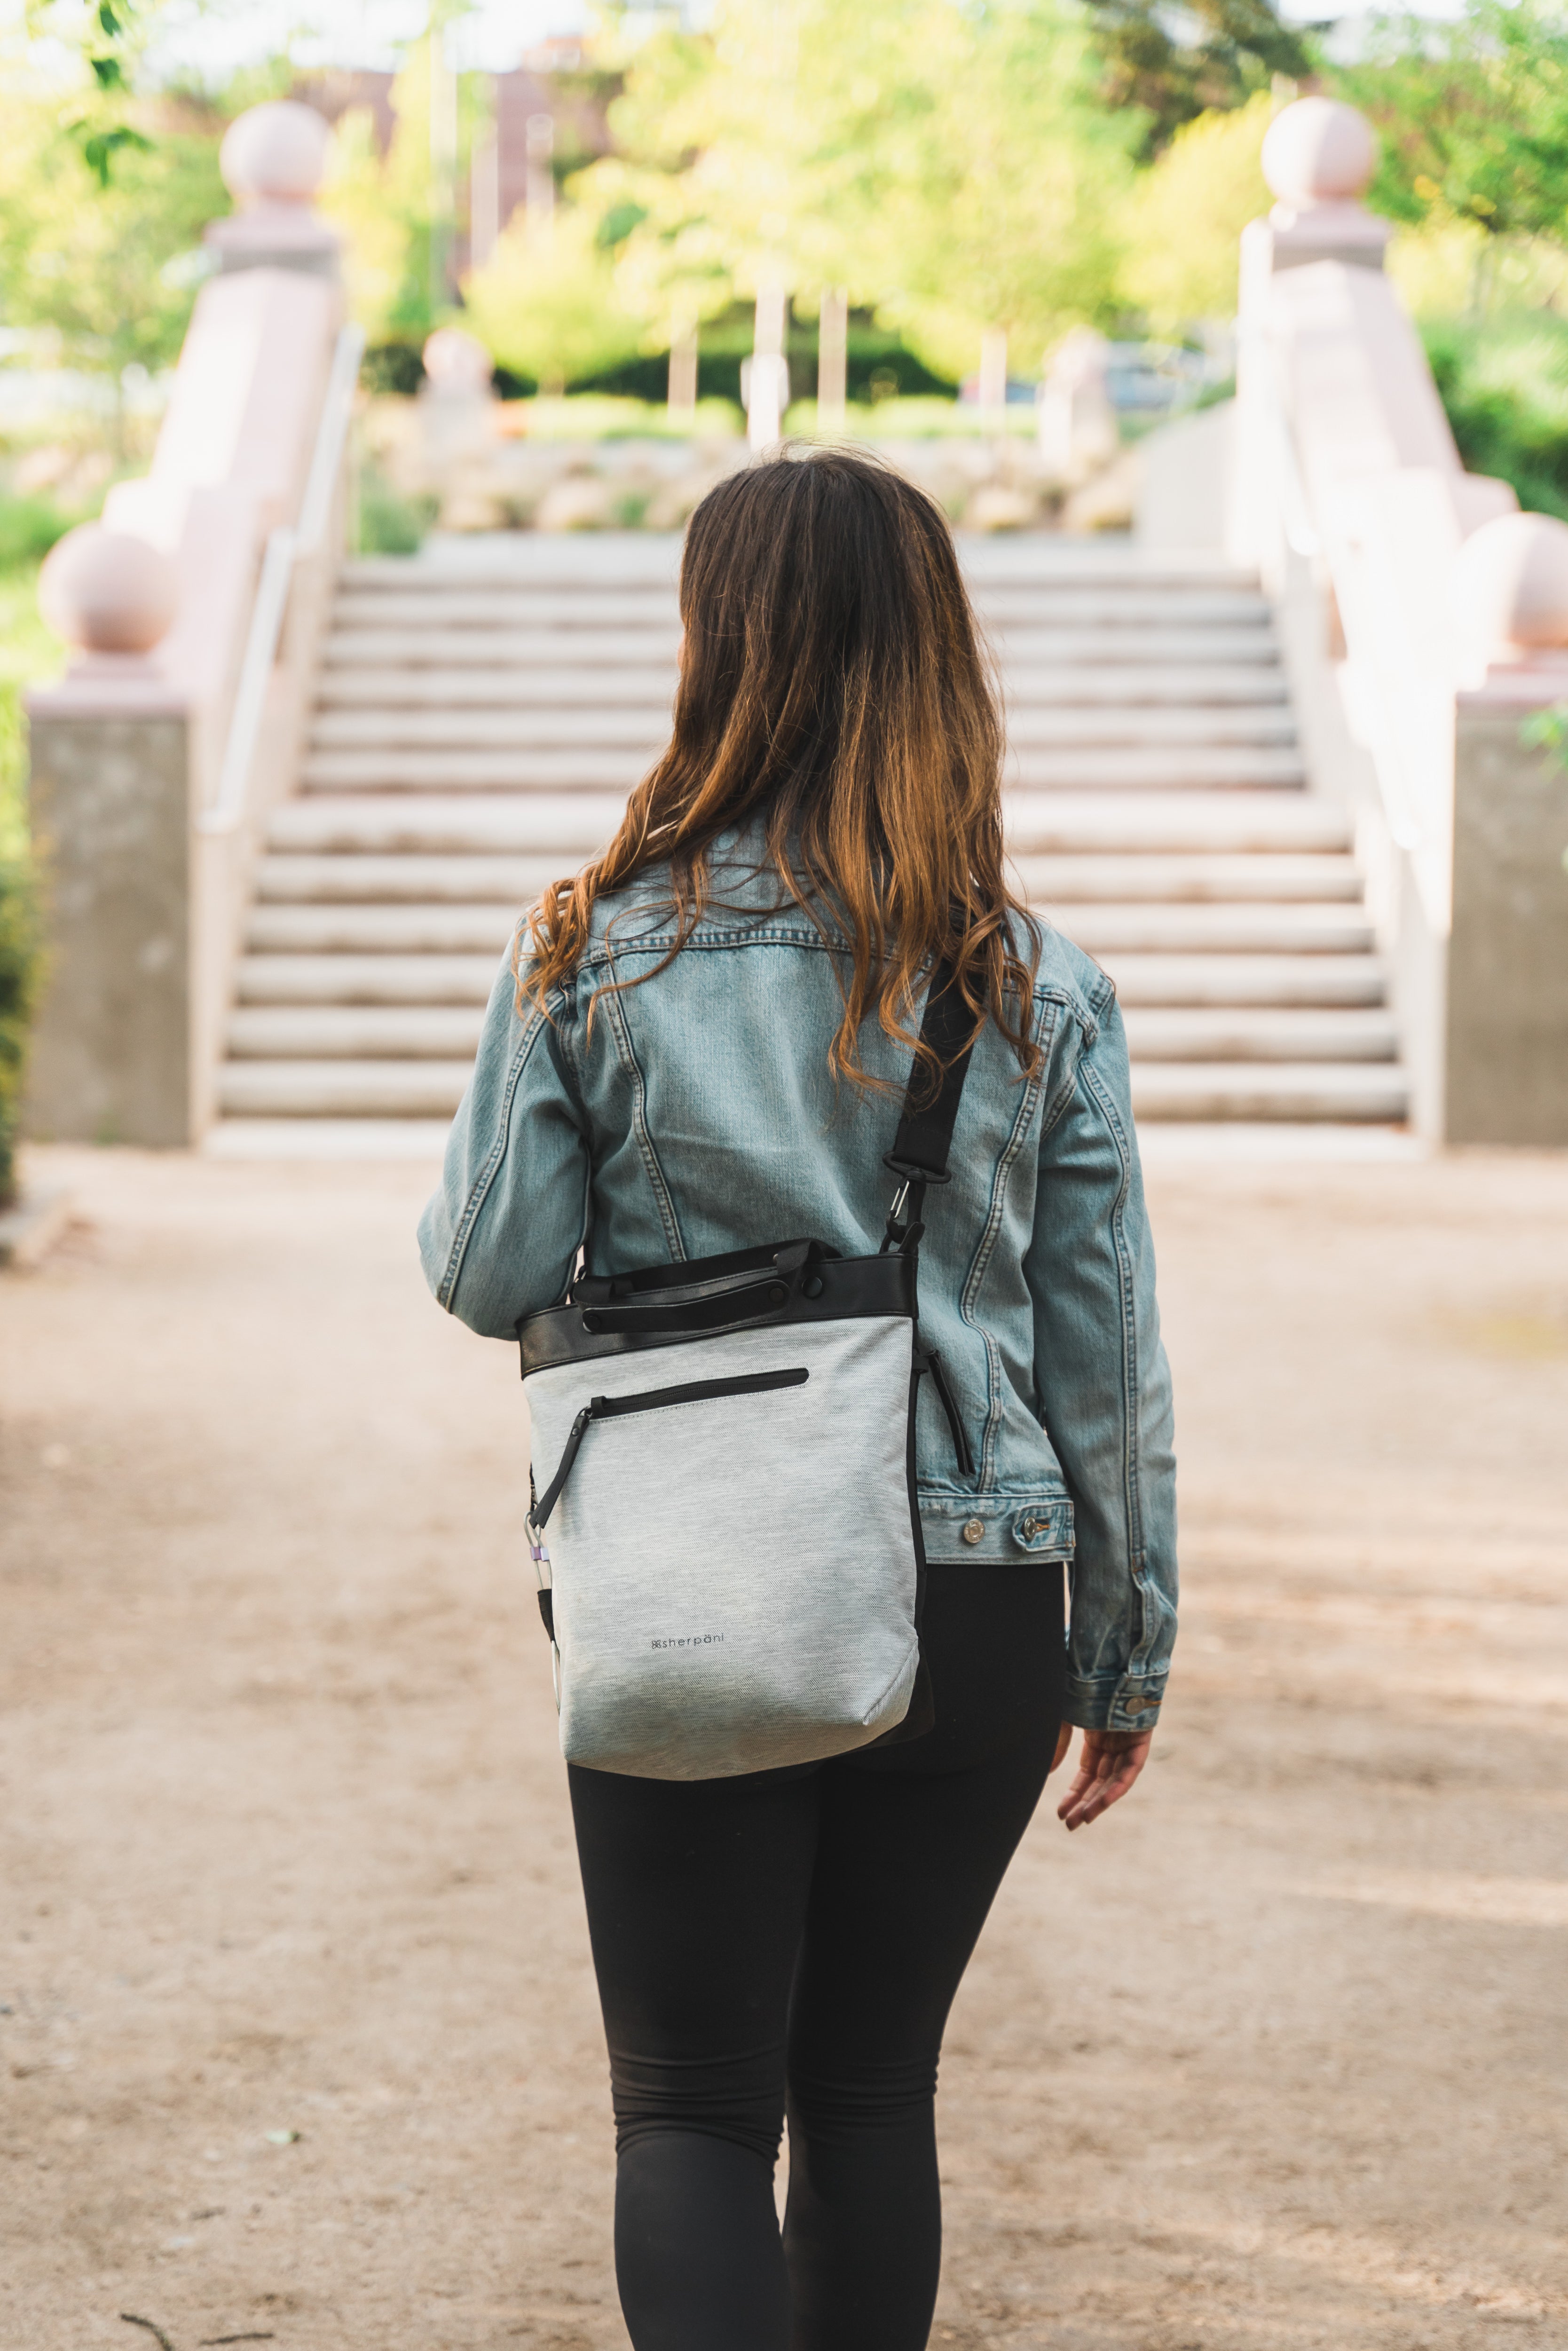 A brown-haired woman walks away from the camera toward an outdoor staircase. She is carrying Sherpani's Anti-Theft bag, the Geo, as a crossbody.